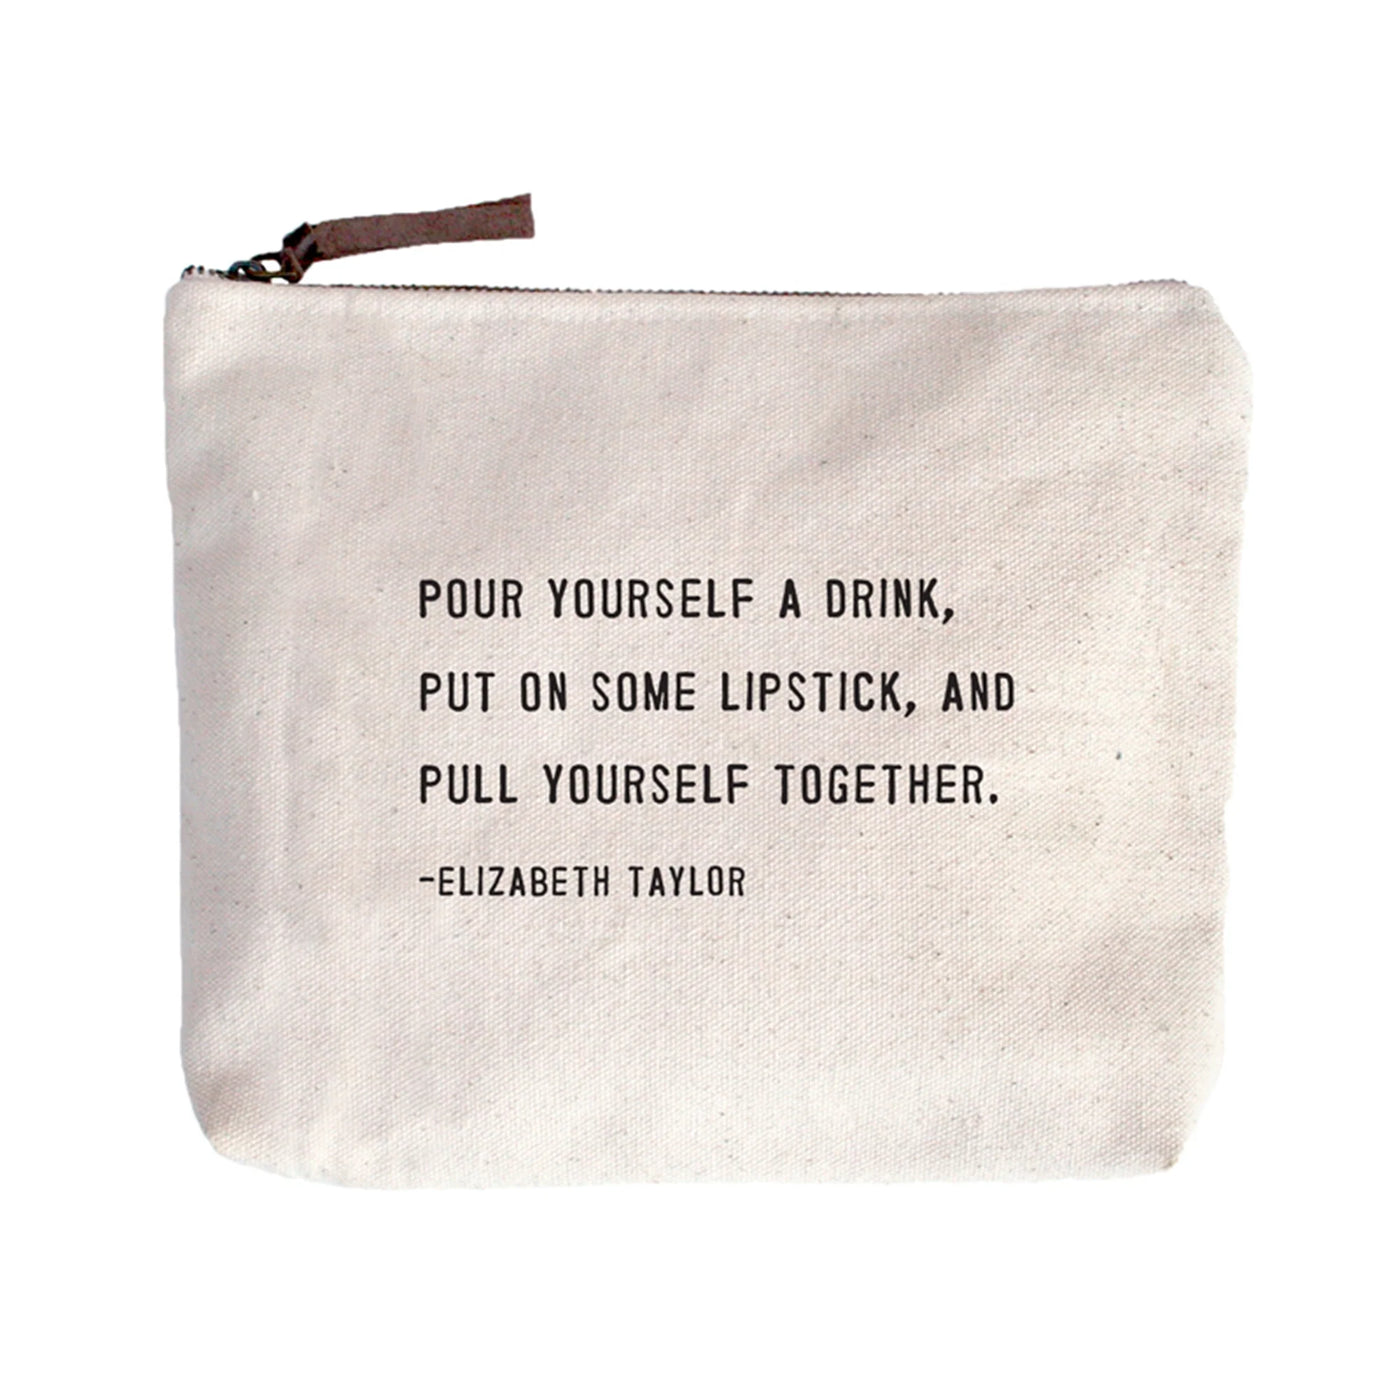 Pull Yourself Together Canvas Bag